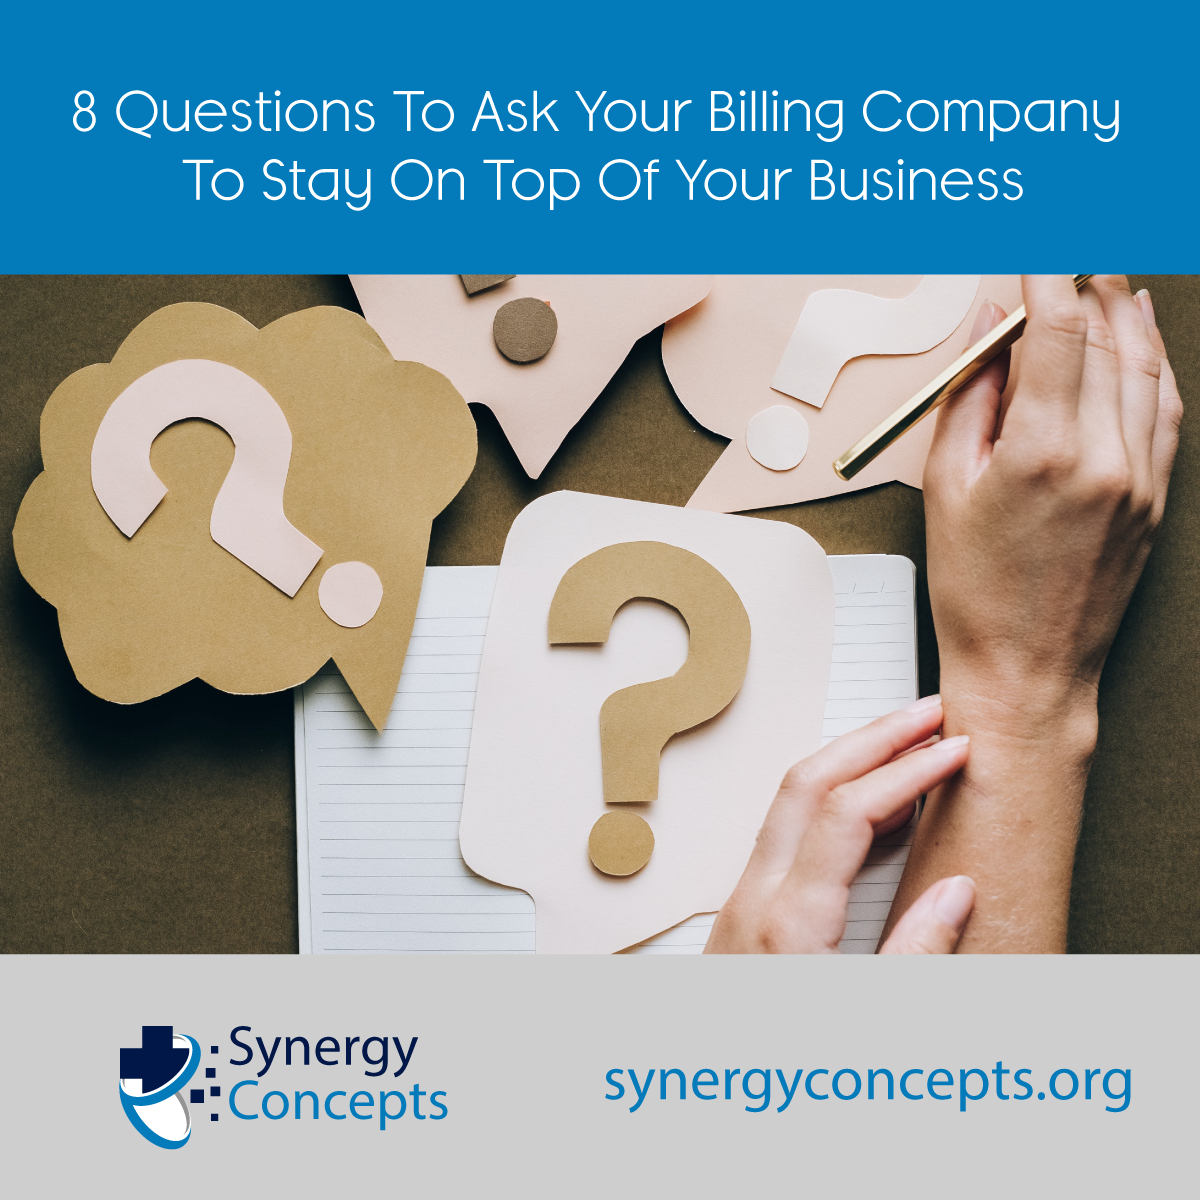 8 Questions To Ask Your Billing Company To Stay On Top Of Your Business